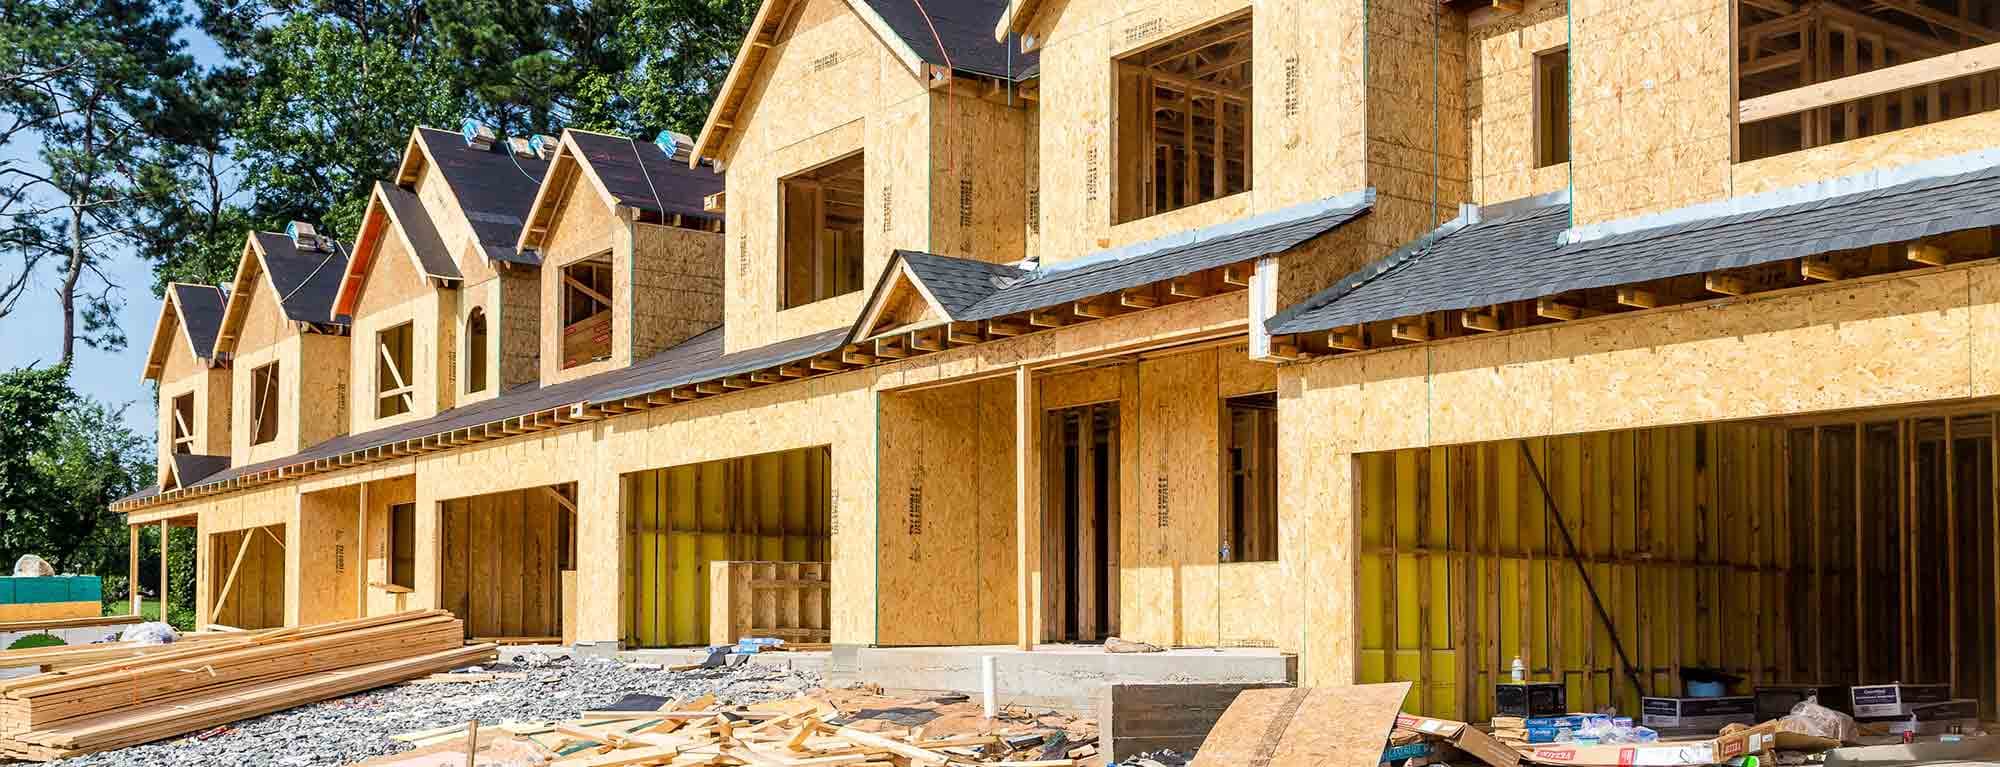 U.S. Census Bureau: Automated Detection and Classification of Nationwide Residential Construction